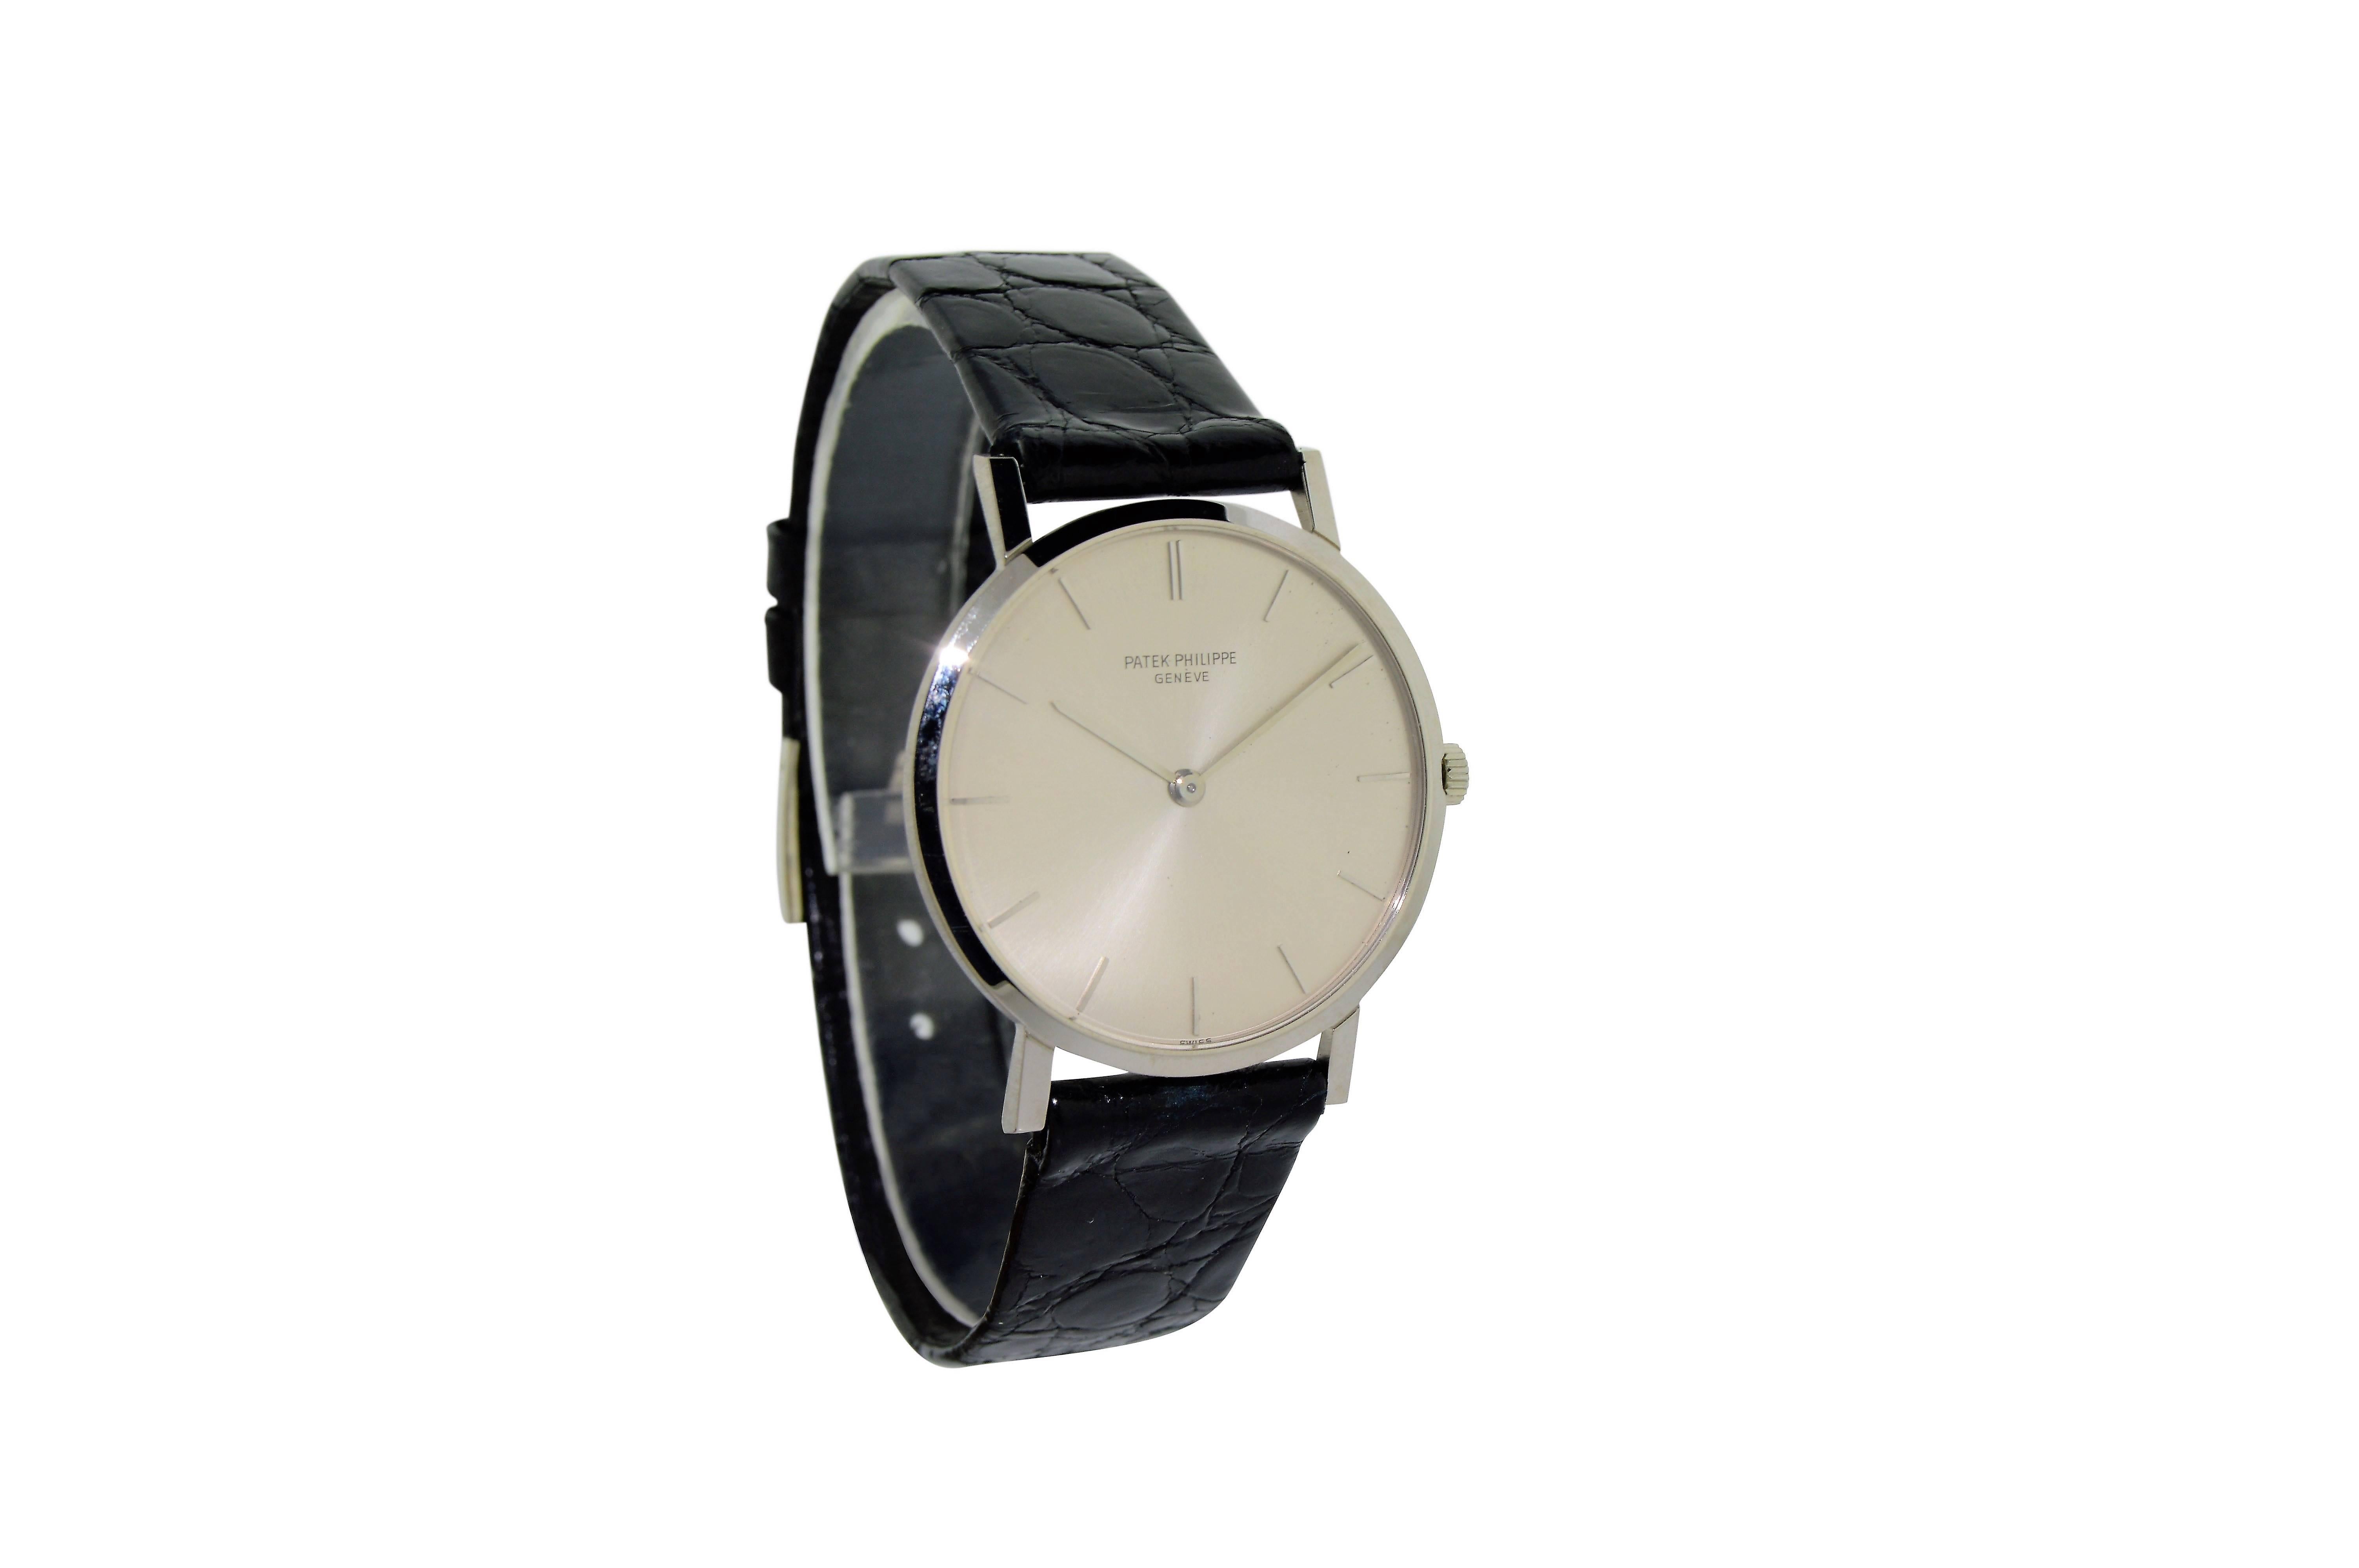 FACTORY / HOUSE: Patek Philippe & Company
STYLE / REFERENCE: Ultra Thin / Dress / Ref. 3512
METAL / MATERIAL: 18kt White Gold
DIMENSIONS:  36mm  X  30mm
CIRCA: 1964-66
MOVEMENT / CALIBER: Manual Winding / 18 Jewels / 8 Adjustments / Cal.